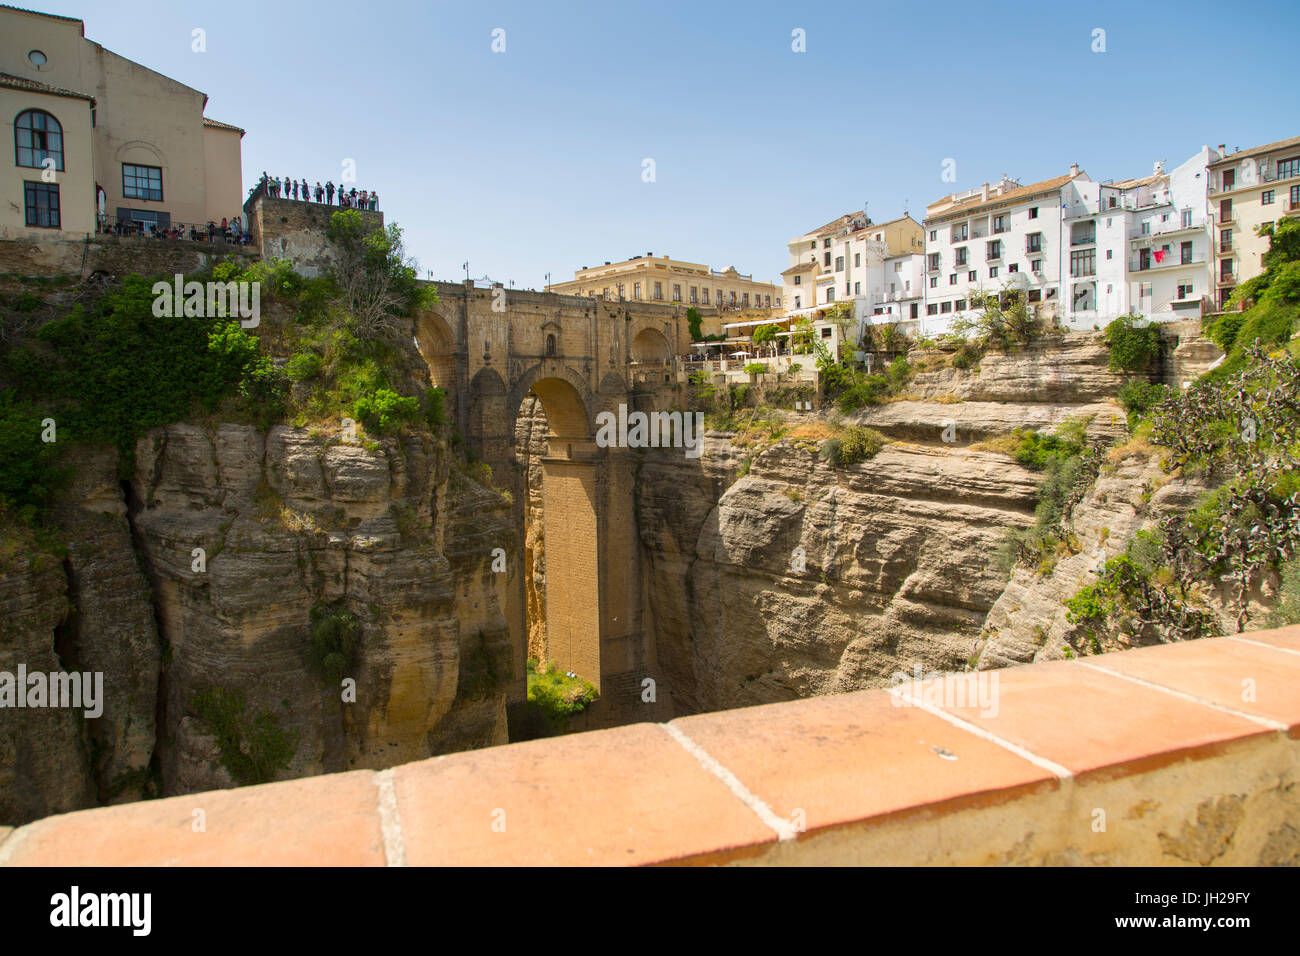 View of Ronda and Puente Nuevo from Jardines De Cuenca, Ronda, Andalusia, Spain, Europe Stock Photo